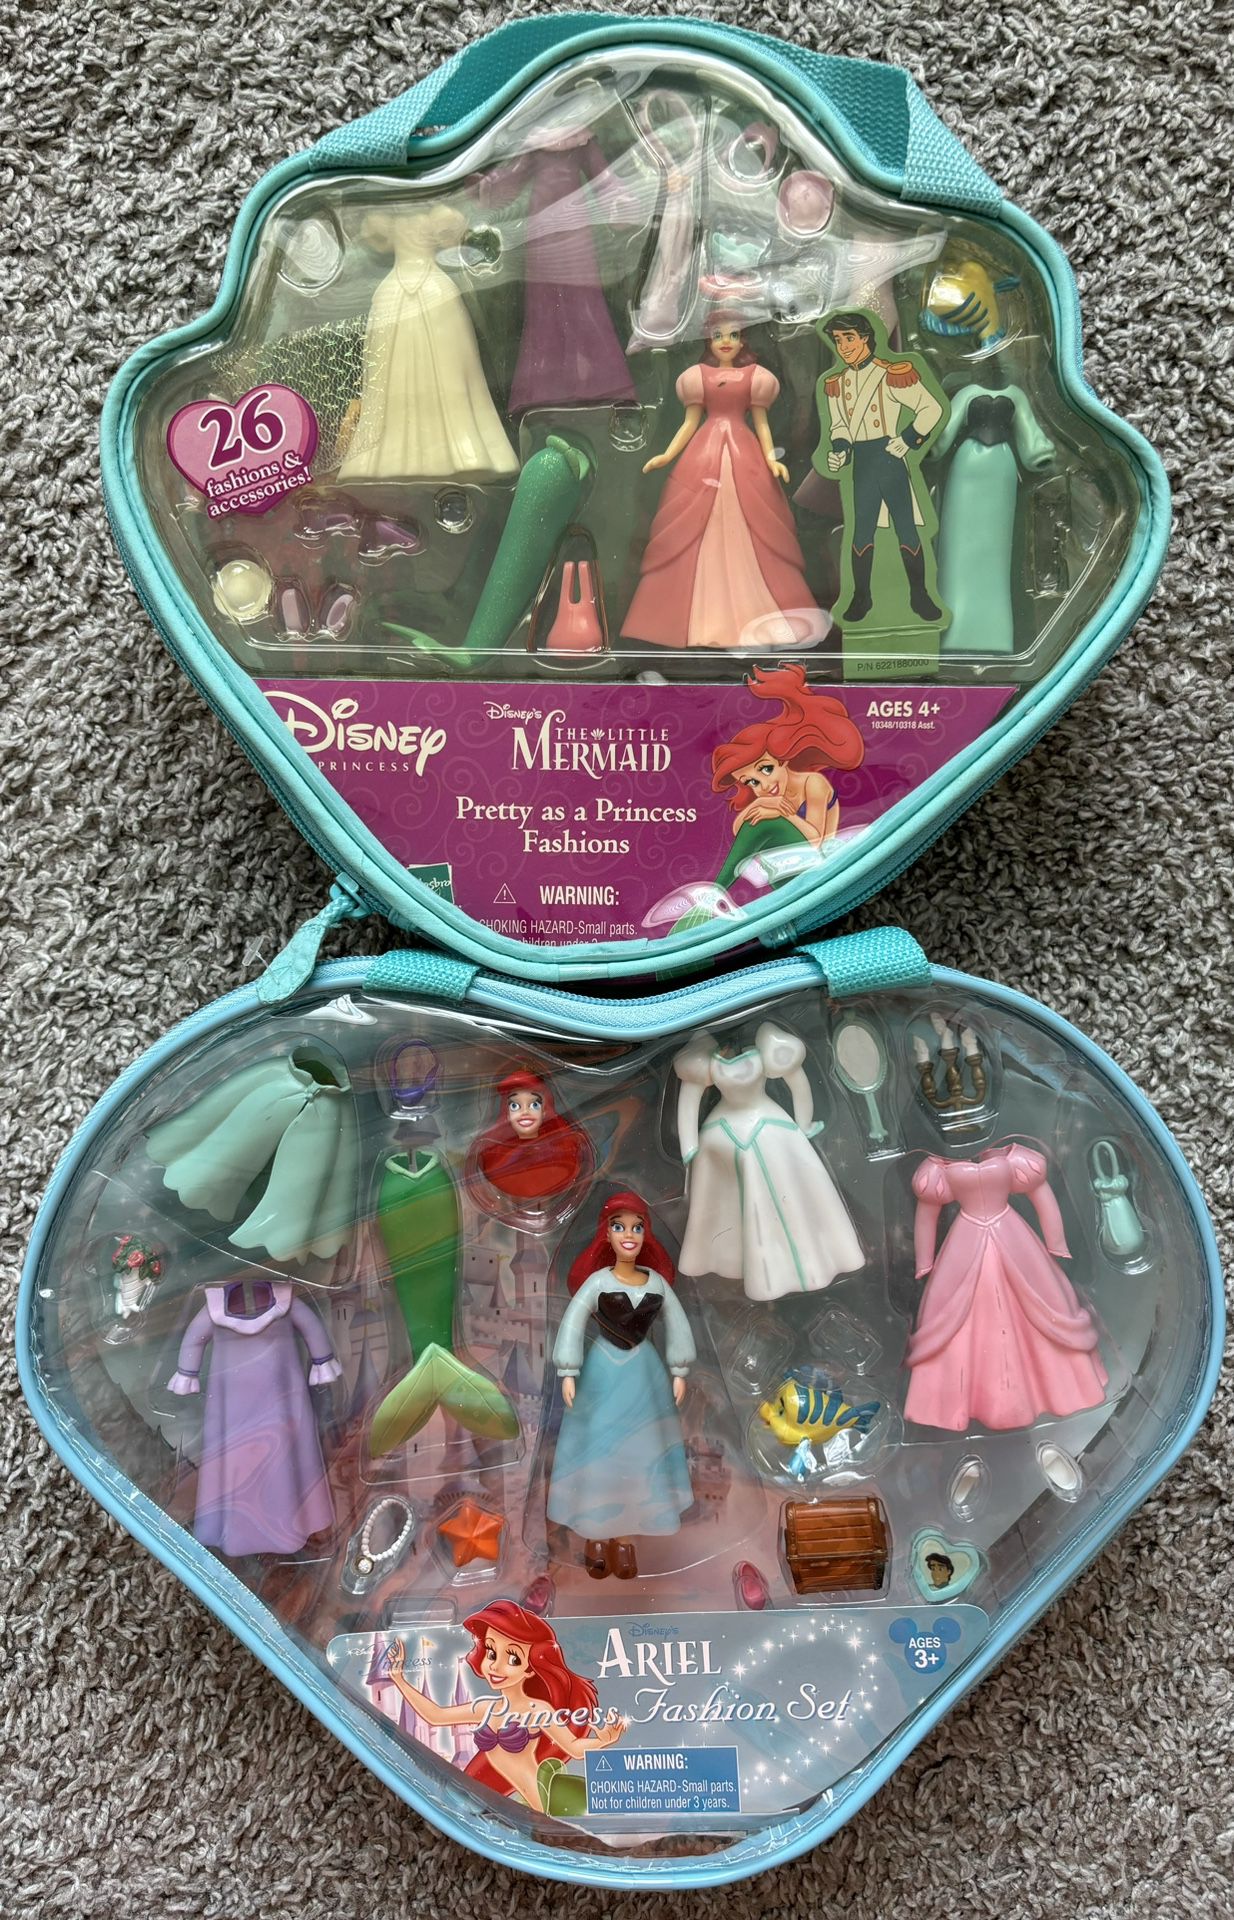 The Little Mermaid Fashion Playsets